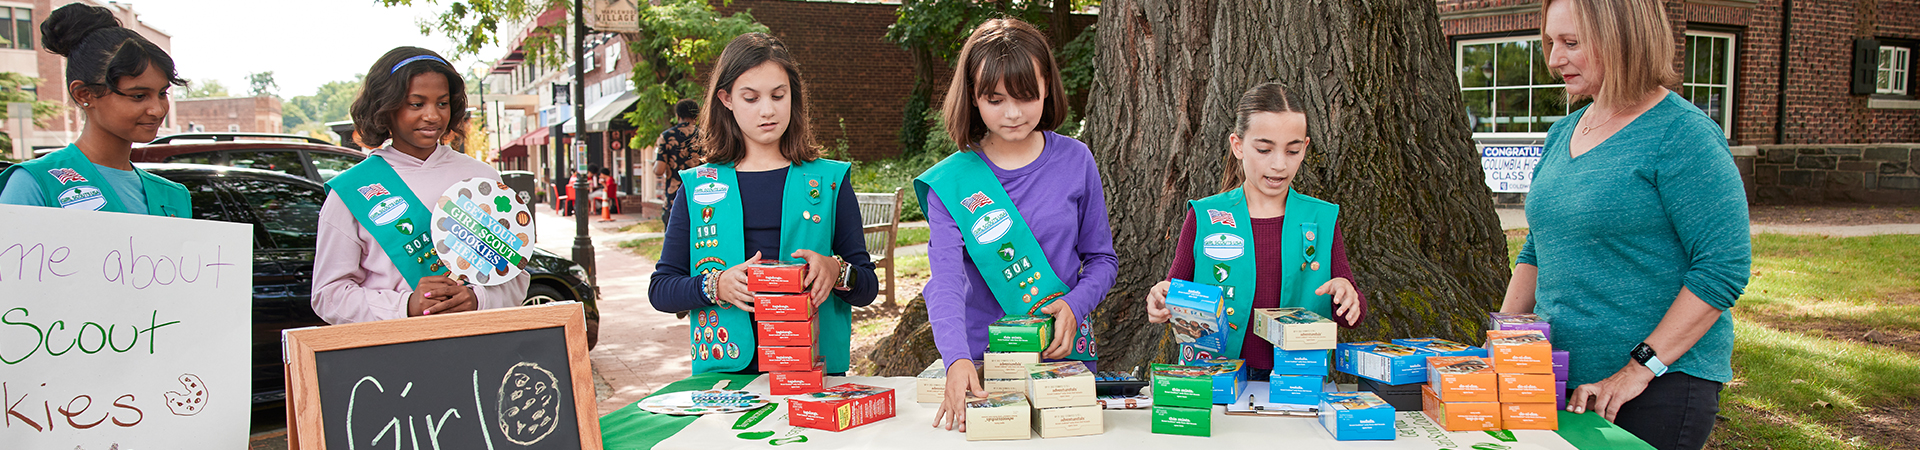  girl scouts and an adult at a cookie booth 